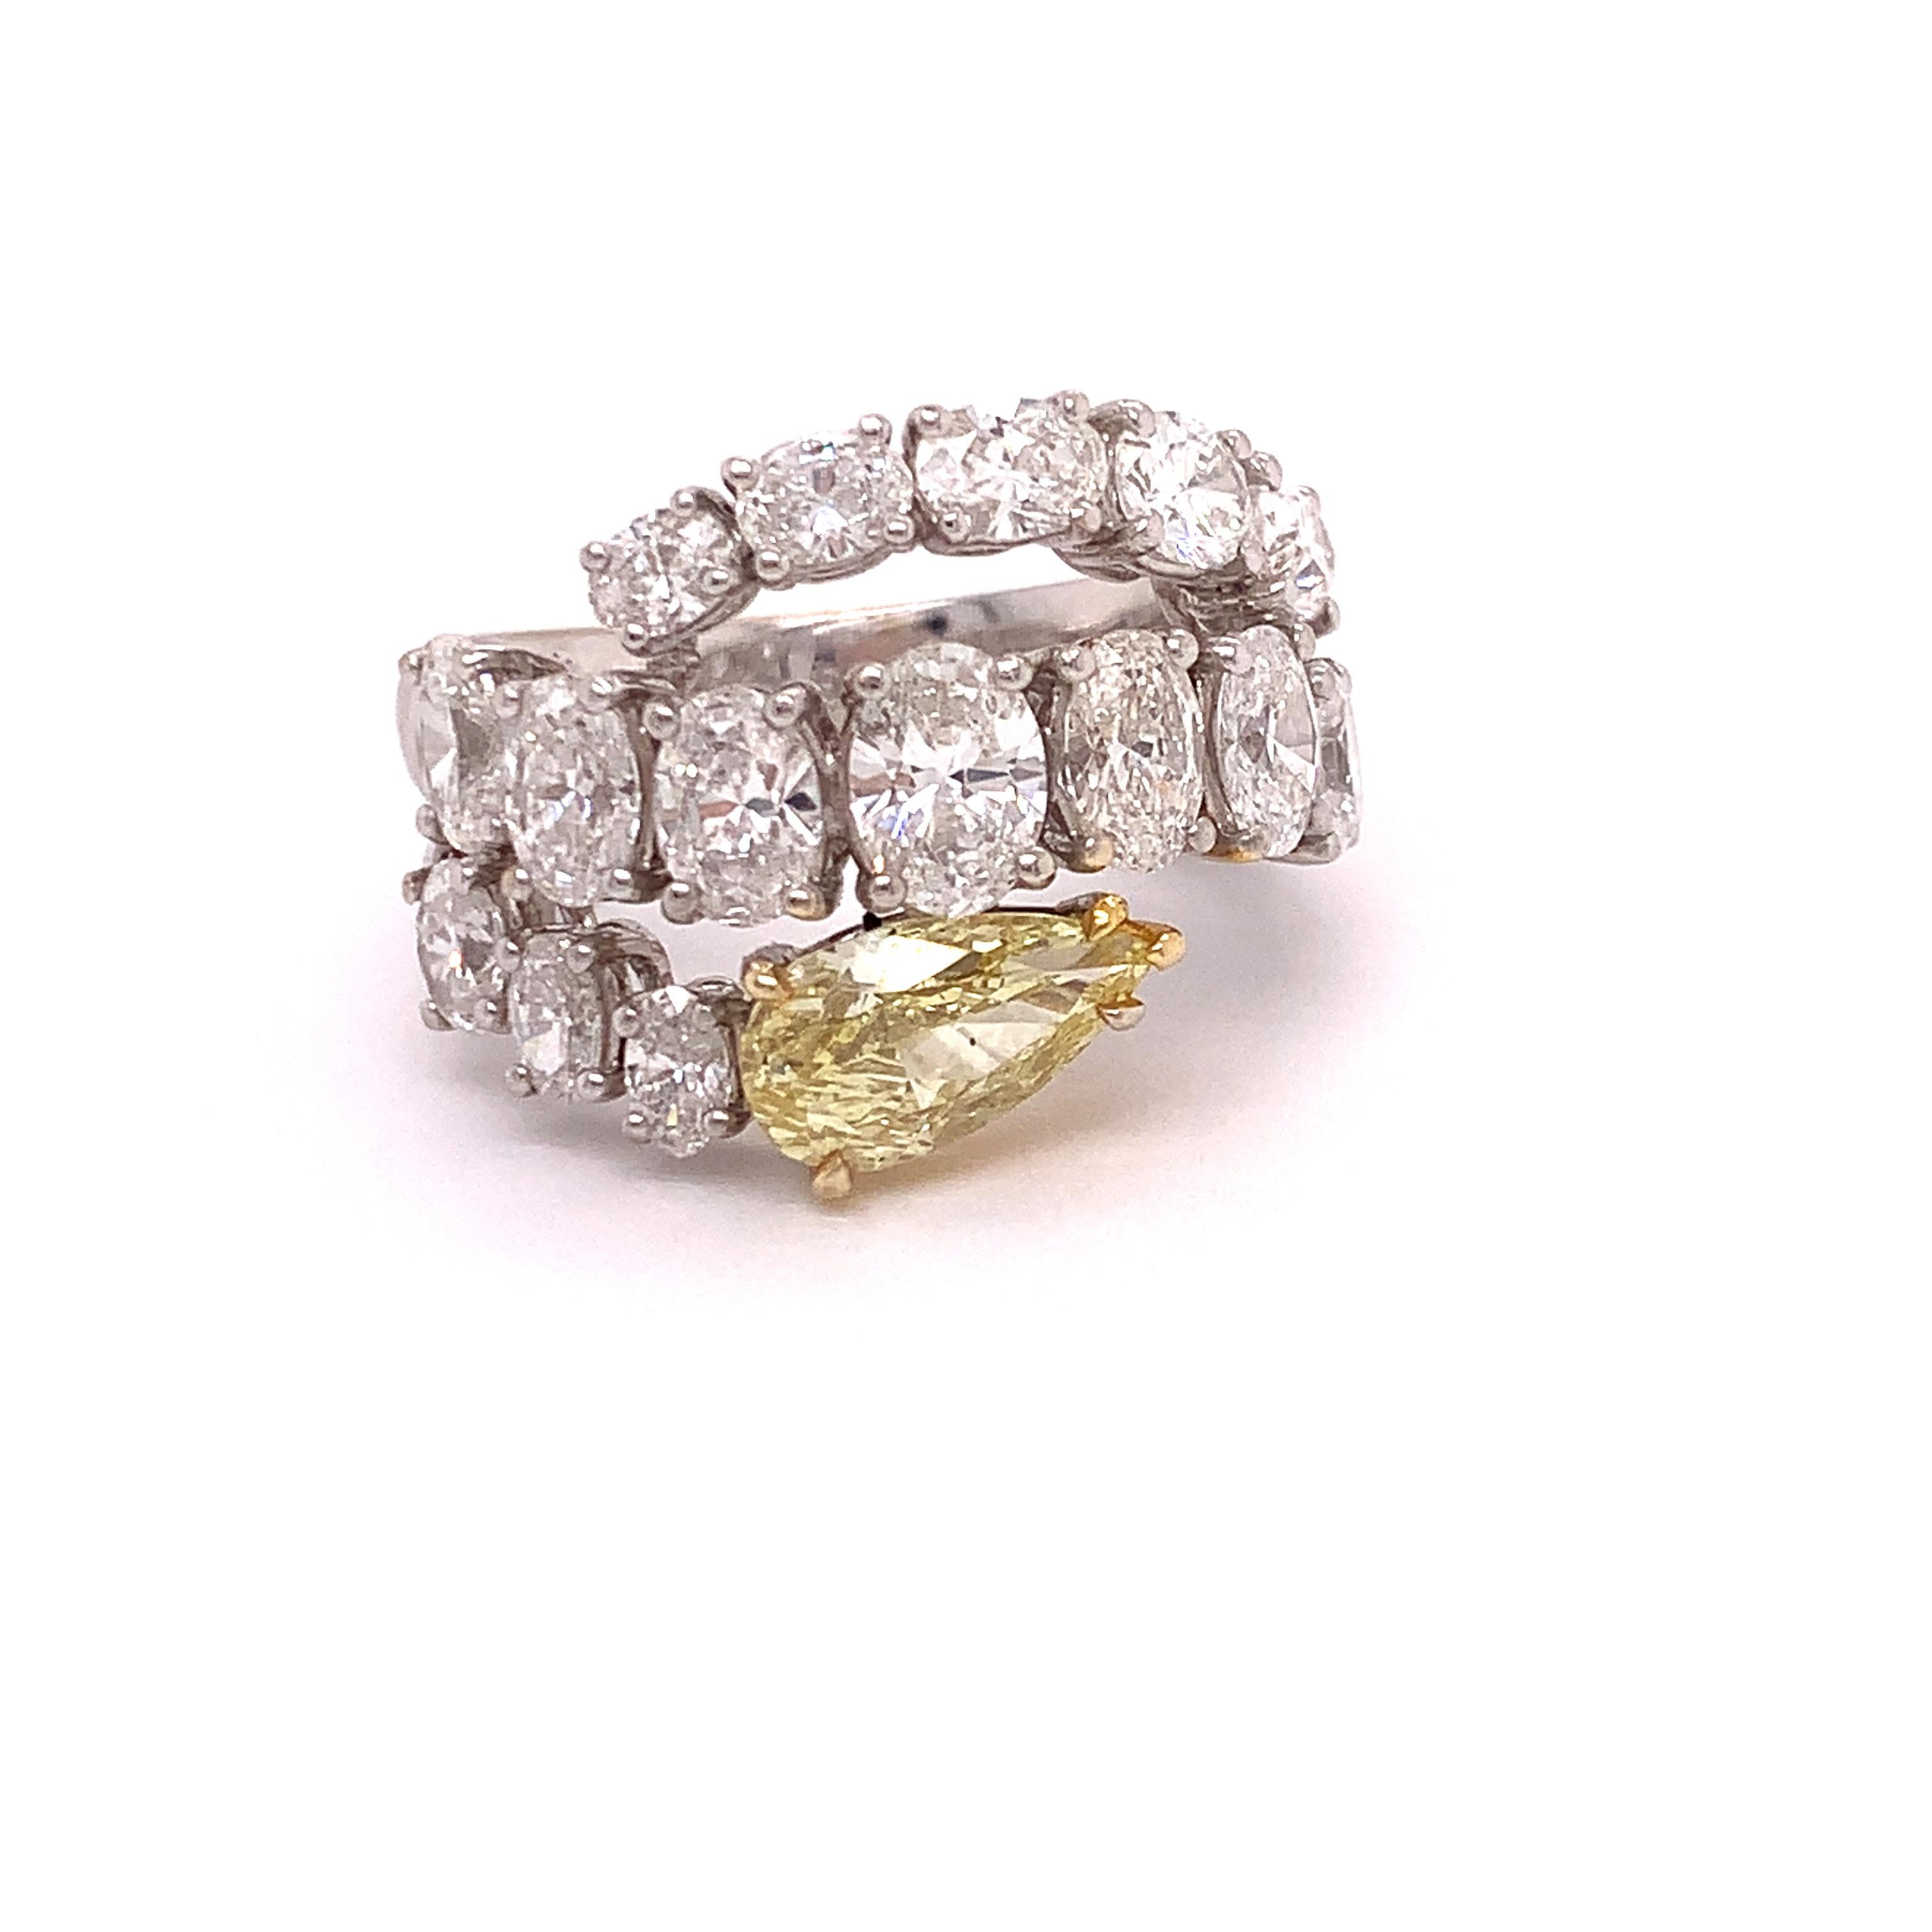 This one of a kind high fashion diamond ring features a 1.79 carat pear shape fancy yellow diamond with SI2 clarity. There are seventeen beautiful oval cut diamonds weighing 3.53 cttw.  They are F color and VVS Clarity.  This is set in 18Kt white